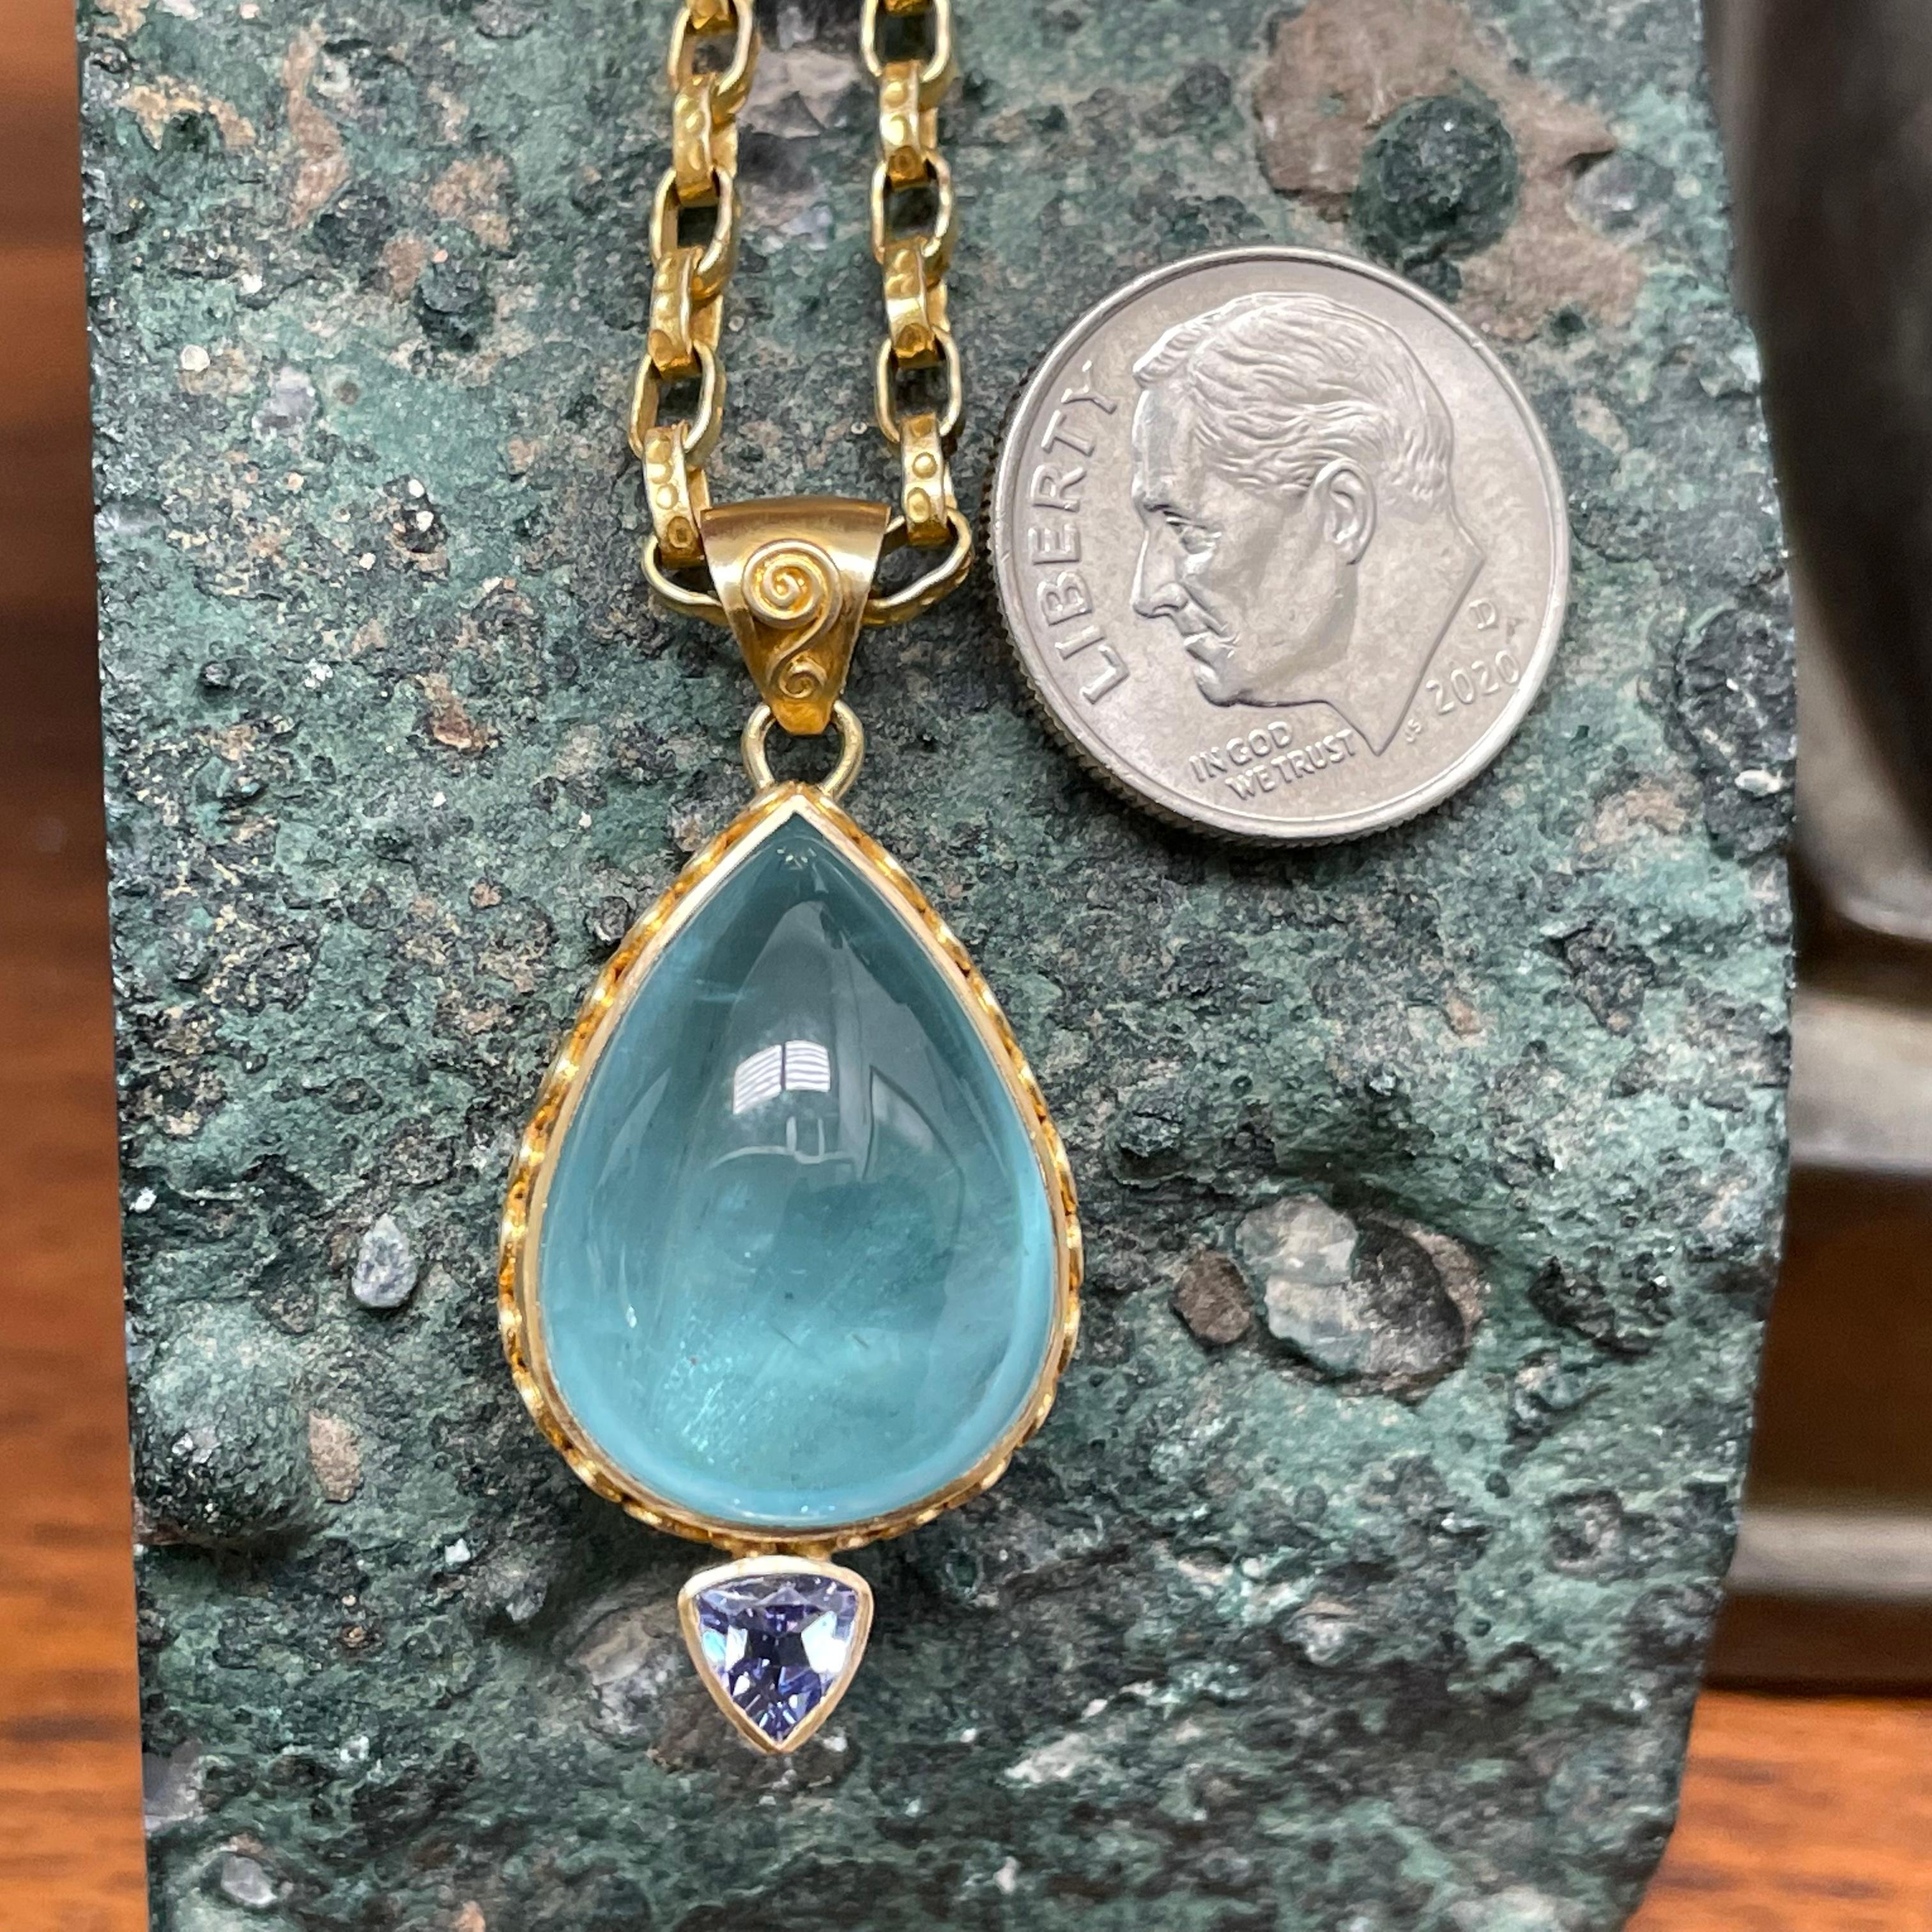 A nice blue, limpid, pear shaped 15 x 19 mm aquamarine cabochon is centered above a 5 mm trillium faceted tanzanite in this Steven Battelle ancient-inspired design.  The aquamarine cabochon is surrounded by 18K gold doubled spirals handwork on the